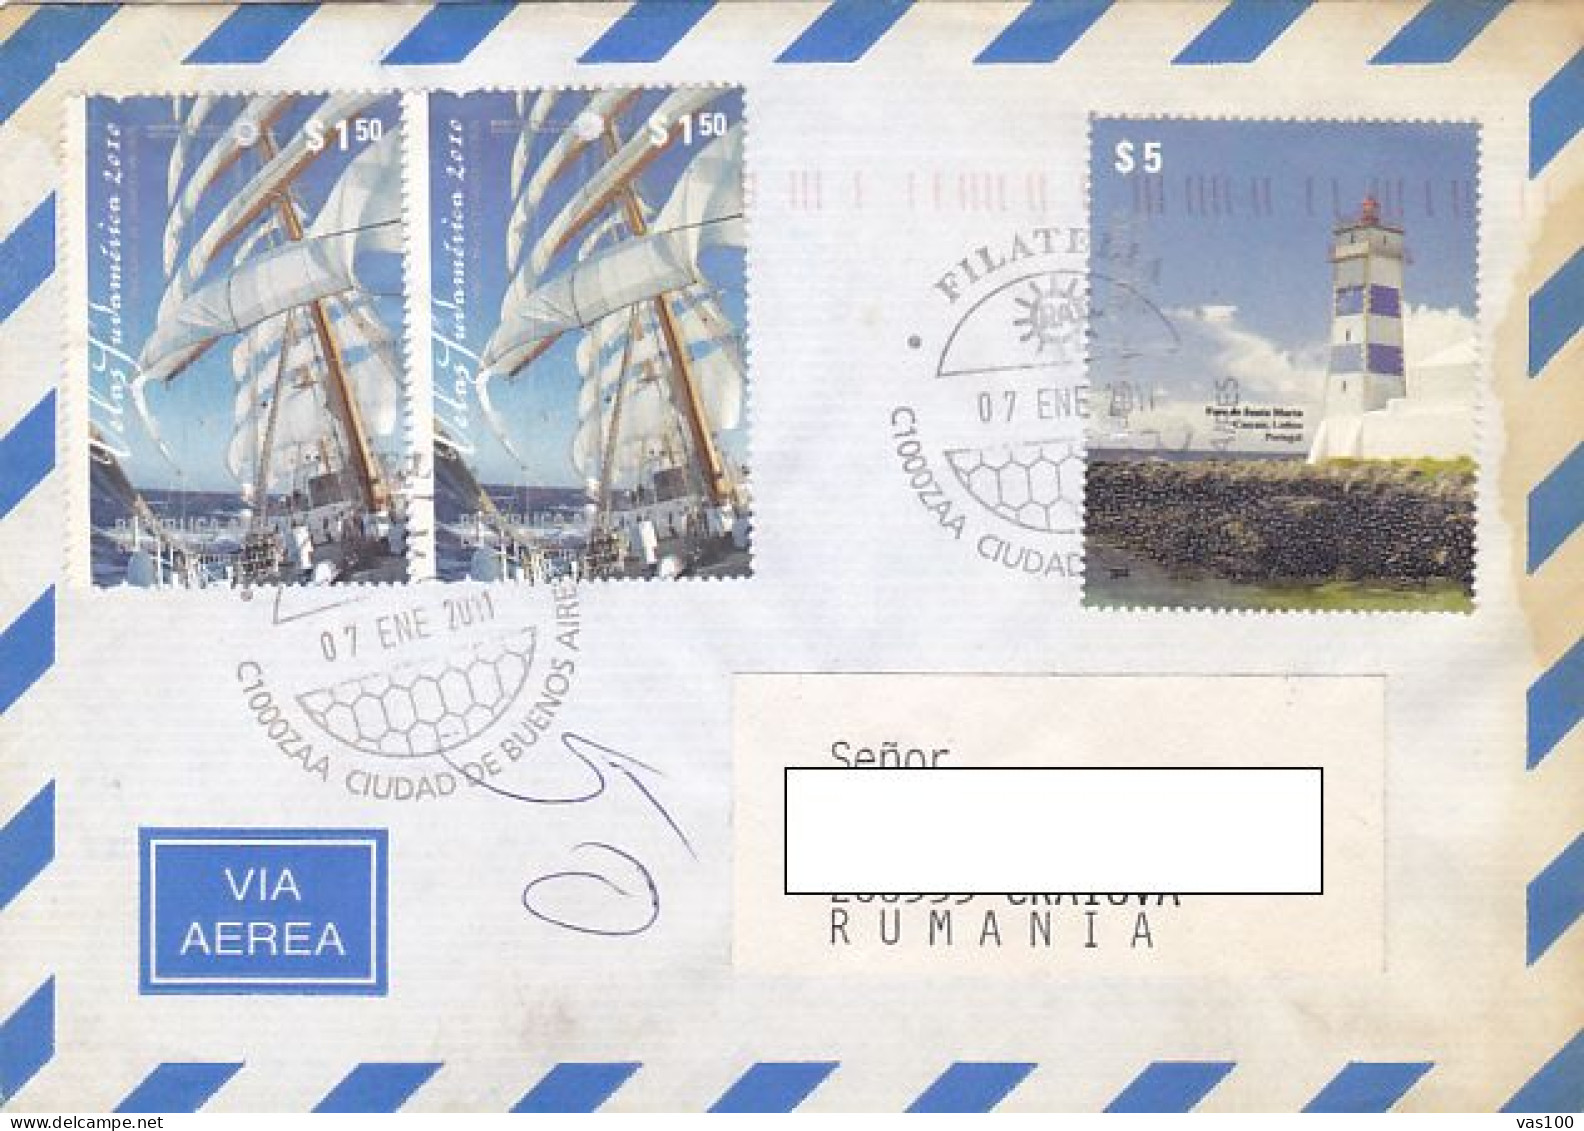 SHIP, SAILING VESSEL, LIGHTHOUSE, STAMPS ON COVER, 2011, ARGENTINA - Lettres & Documents